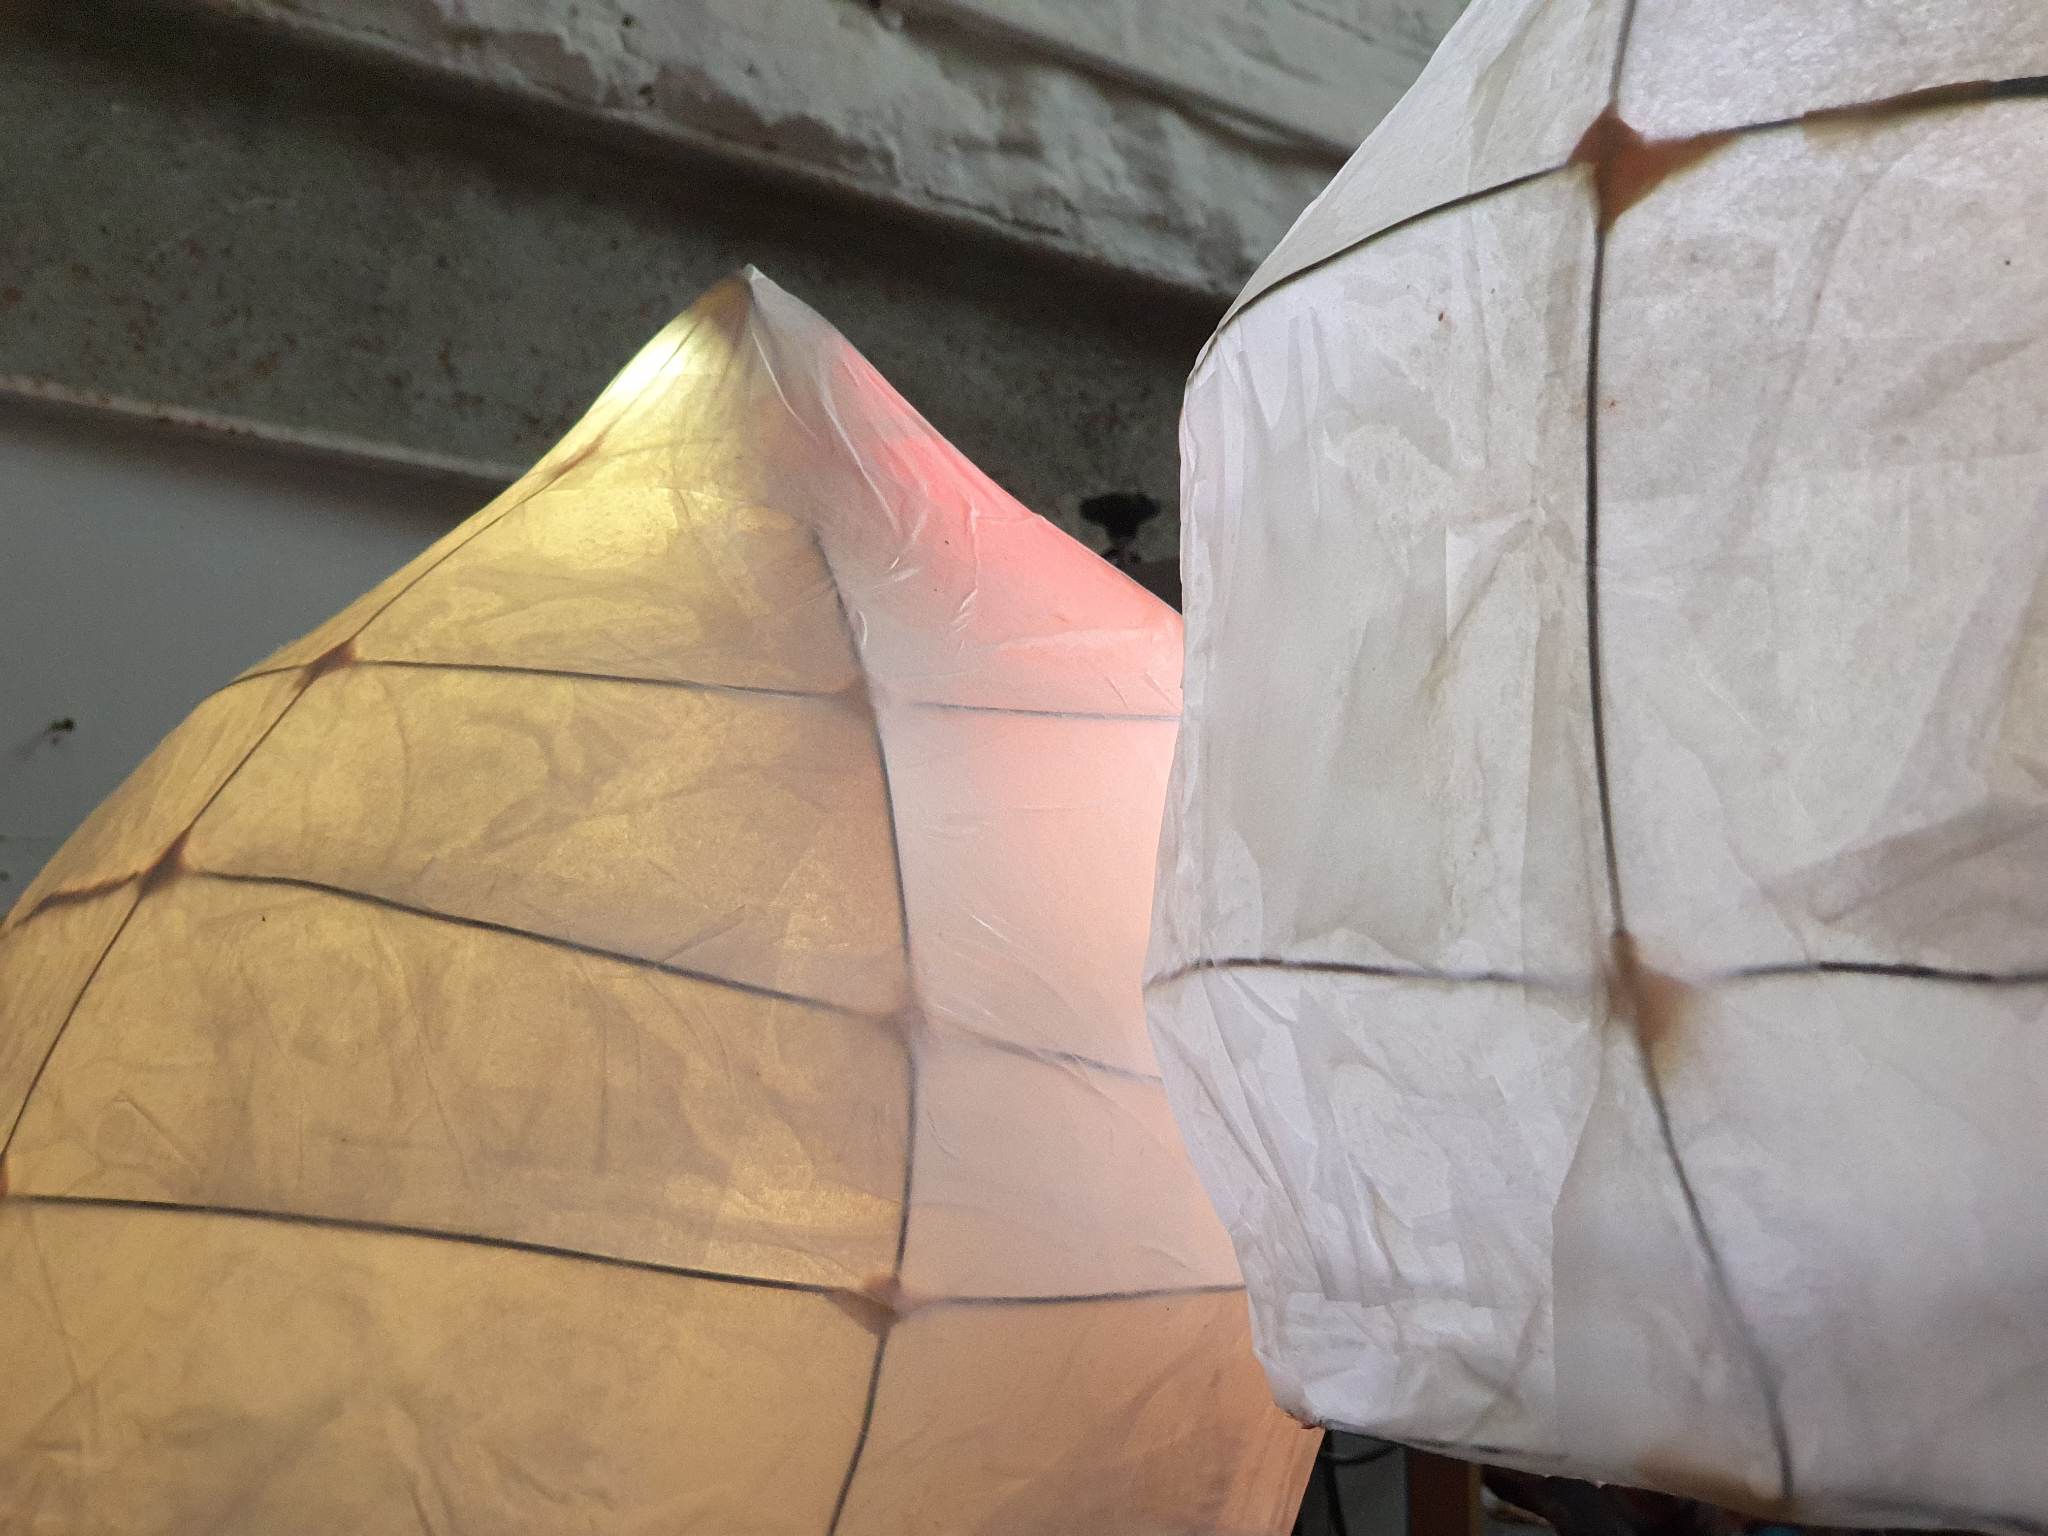 An interactive sculpture, slightly mushroom shaped, made of thin paper-like material, with wired structure and changing lights underneath.